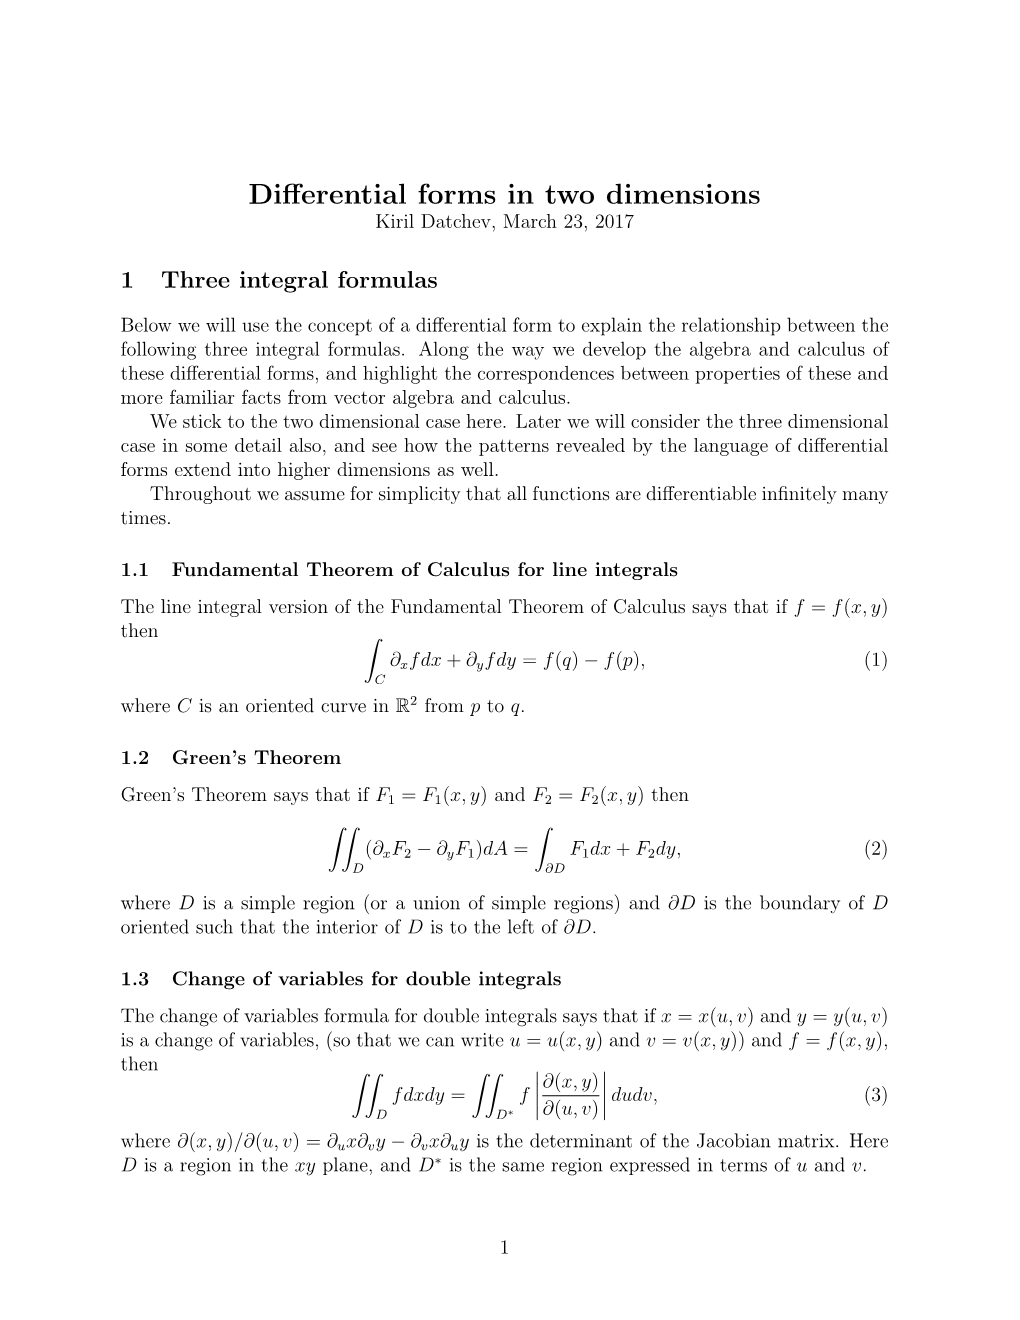 Differential Forms in Two Dimensions